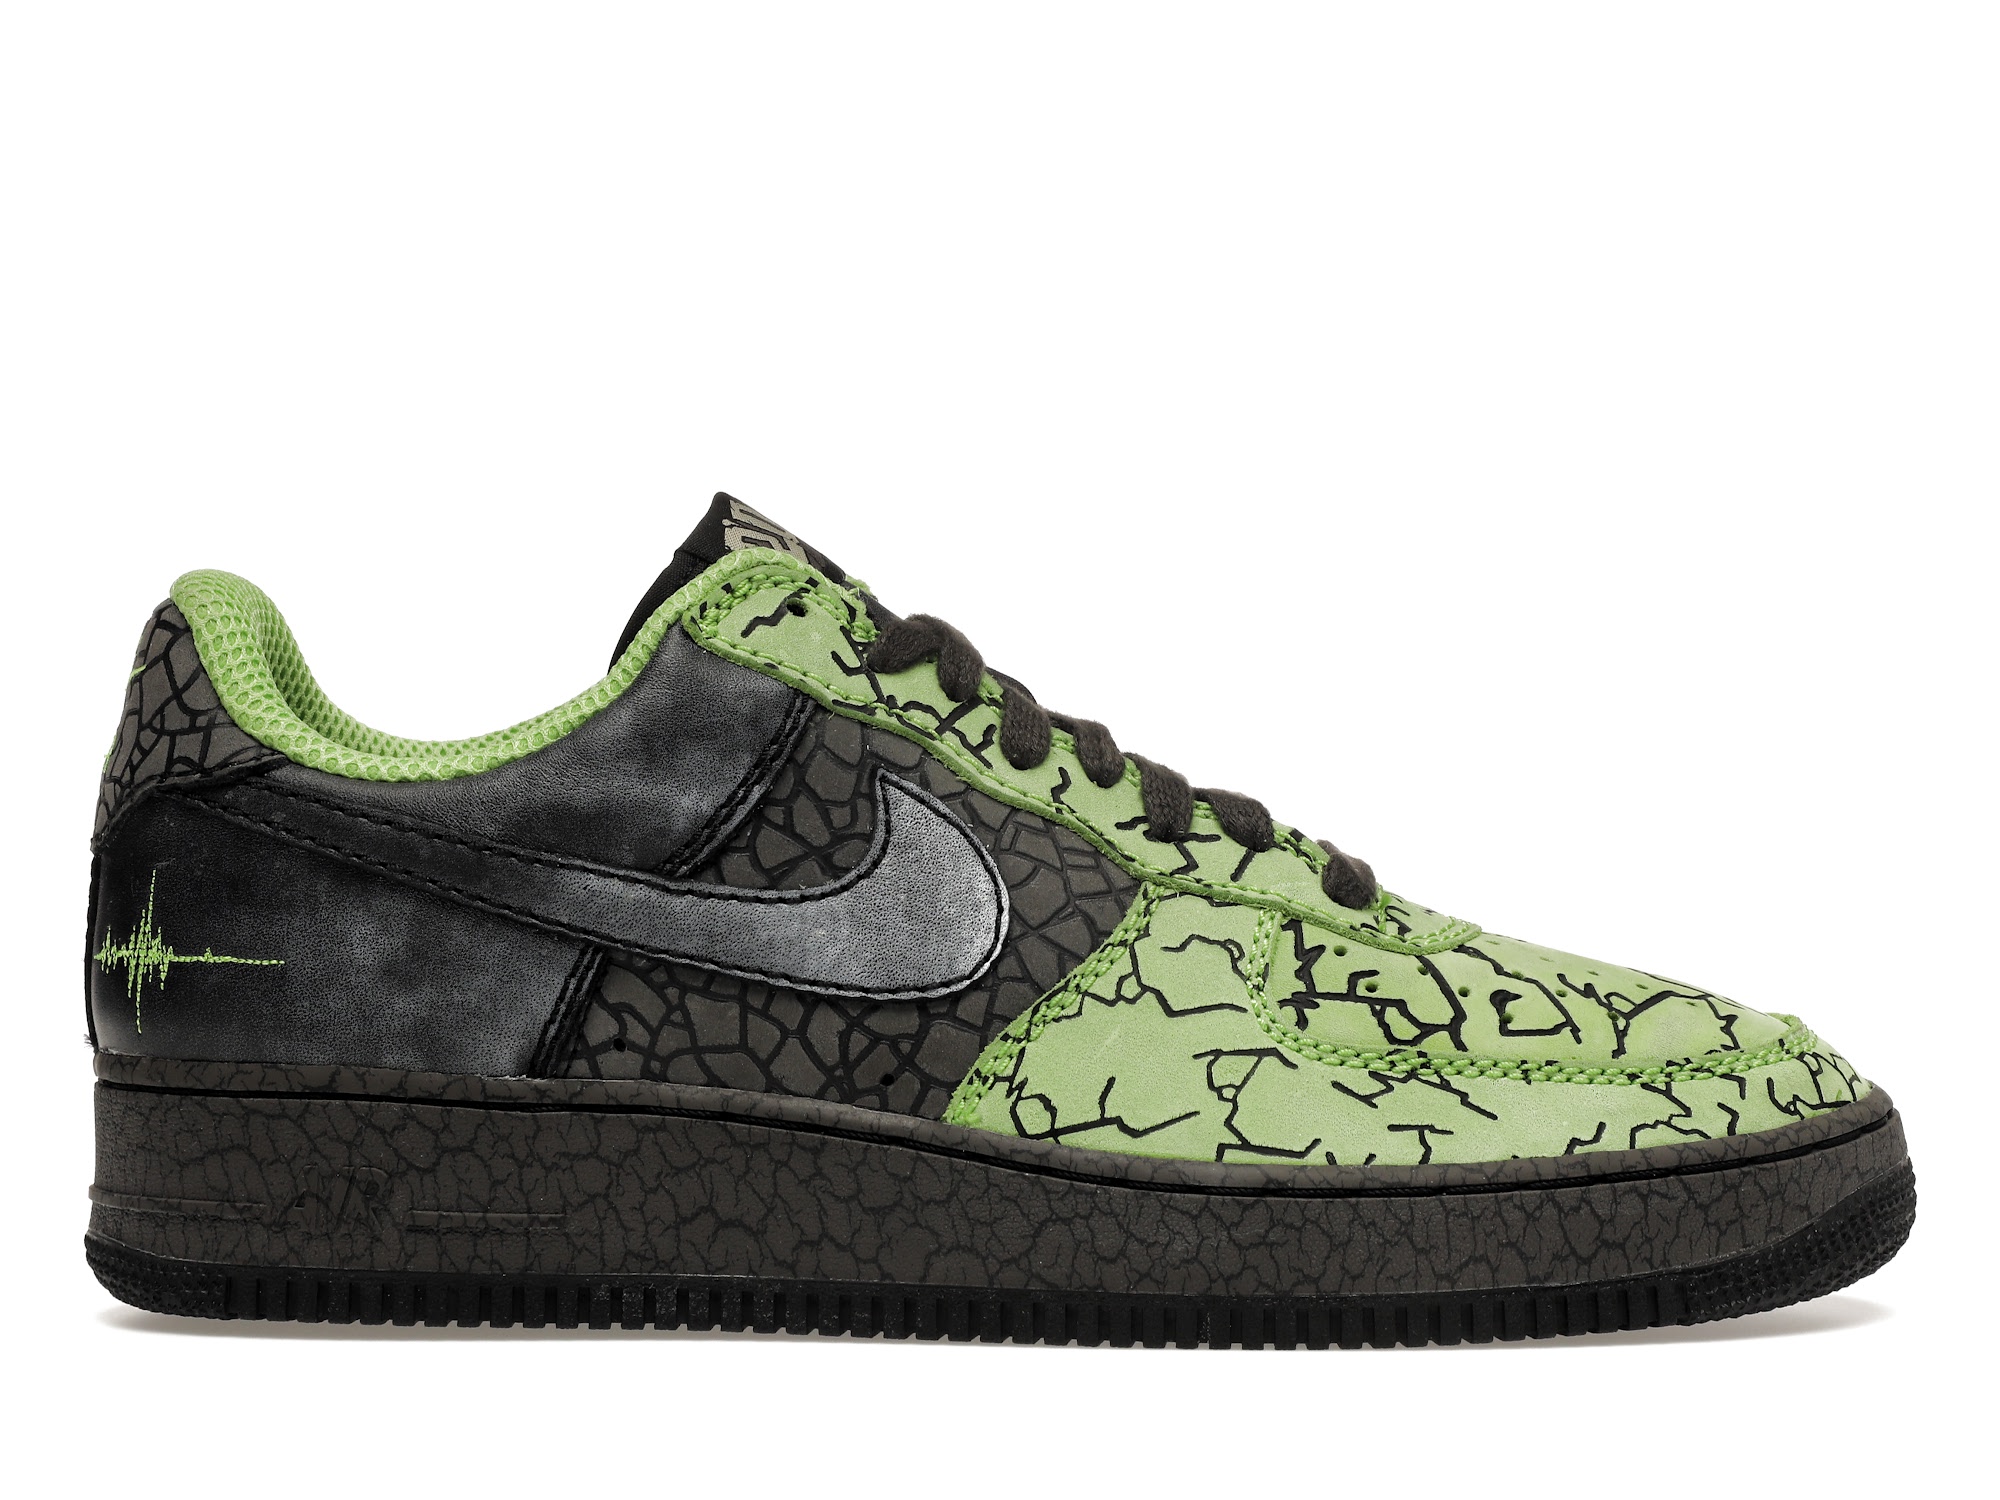 Nike Air Force 1 Low Hufquake Men's - 315206-301 - US